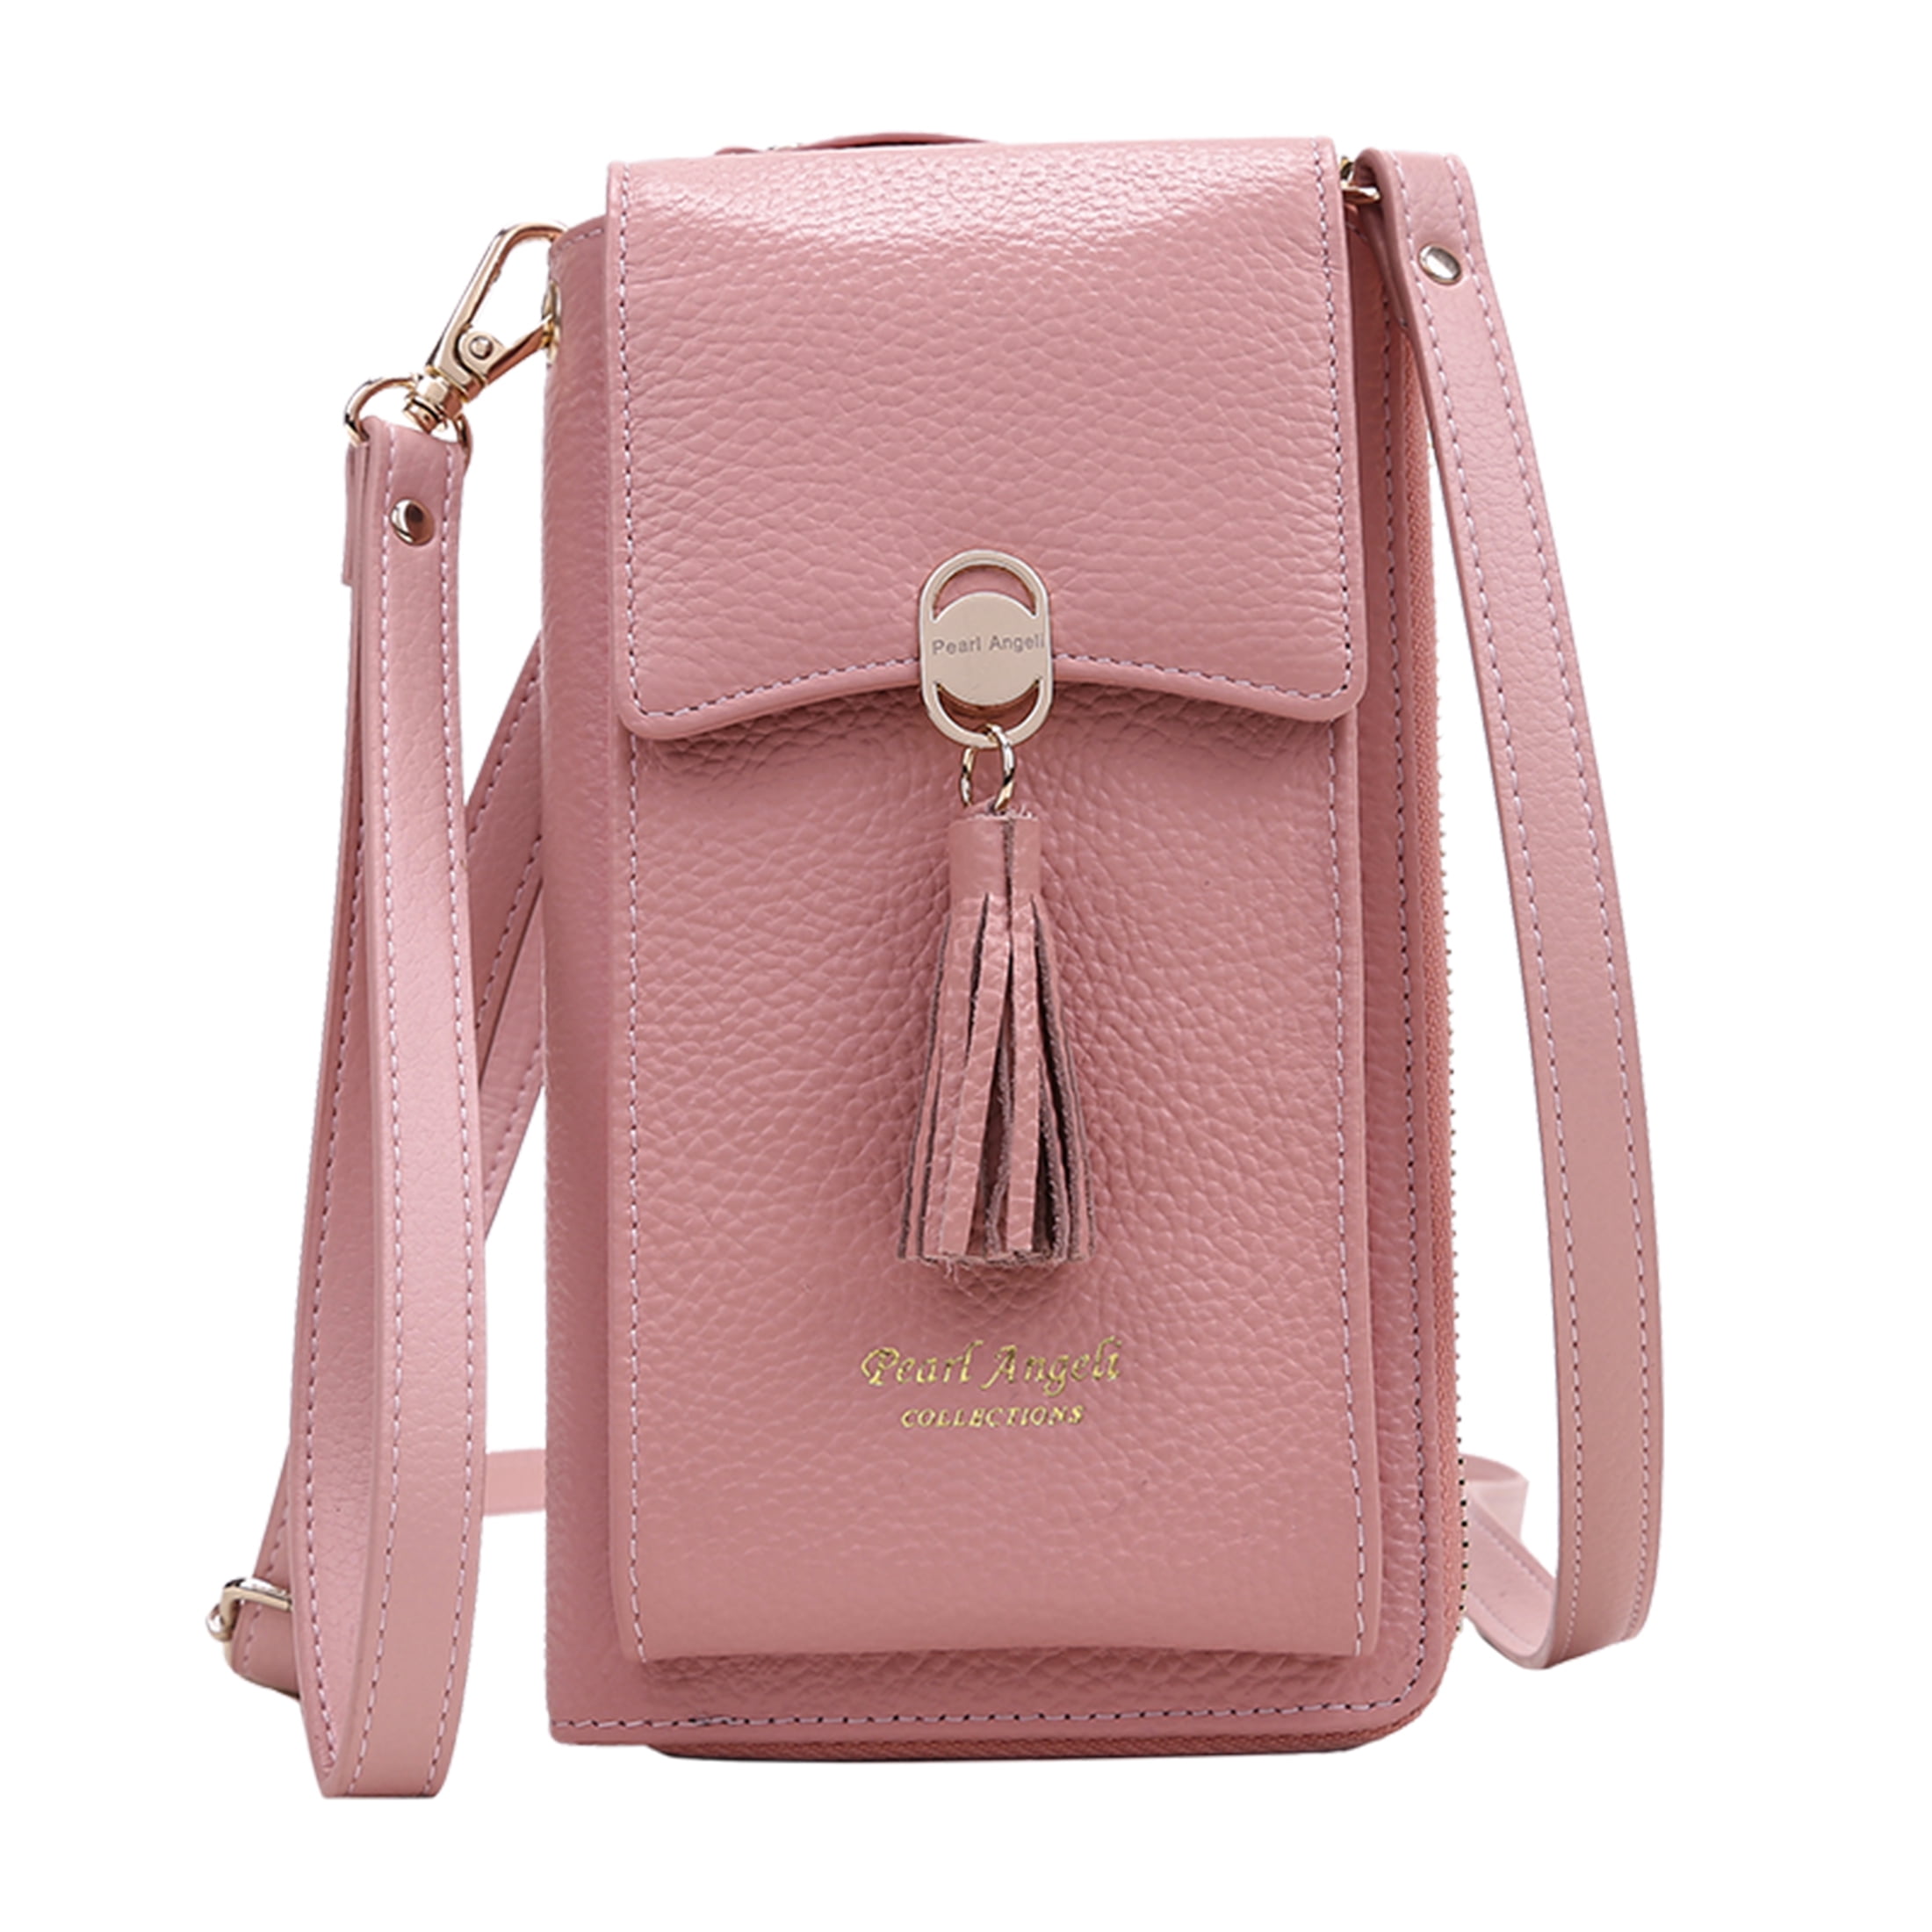 Pearl Angeli Small Crossbody Bags for Women Genuine Leather Shoulder Bag  with RFID Credit Card Holders